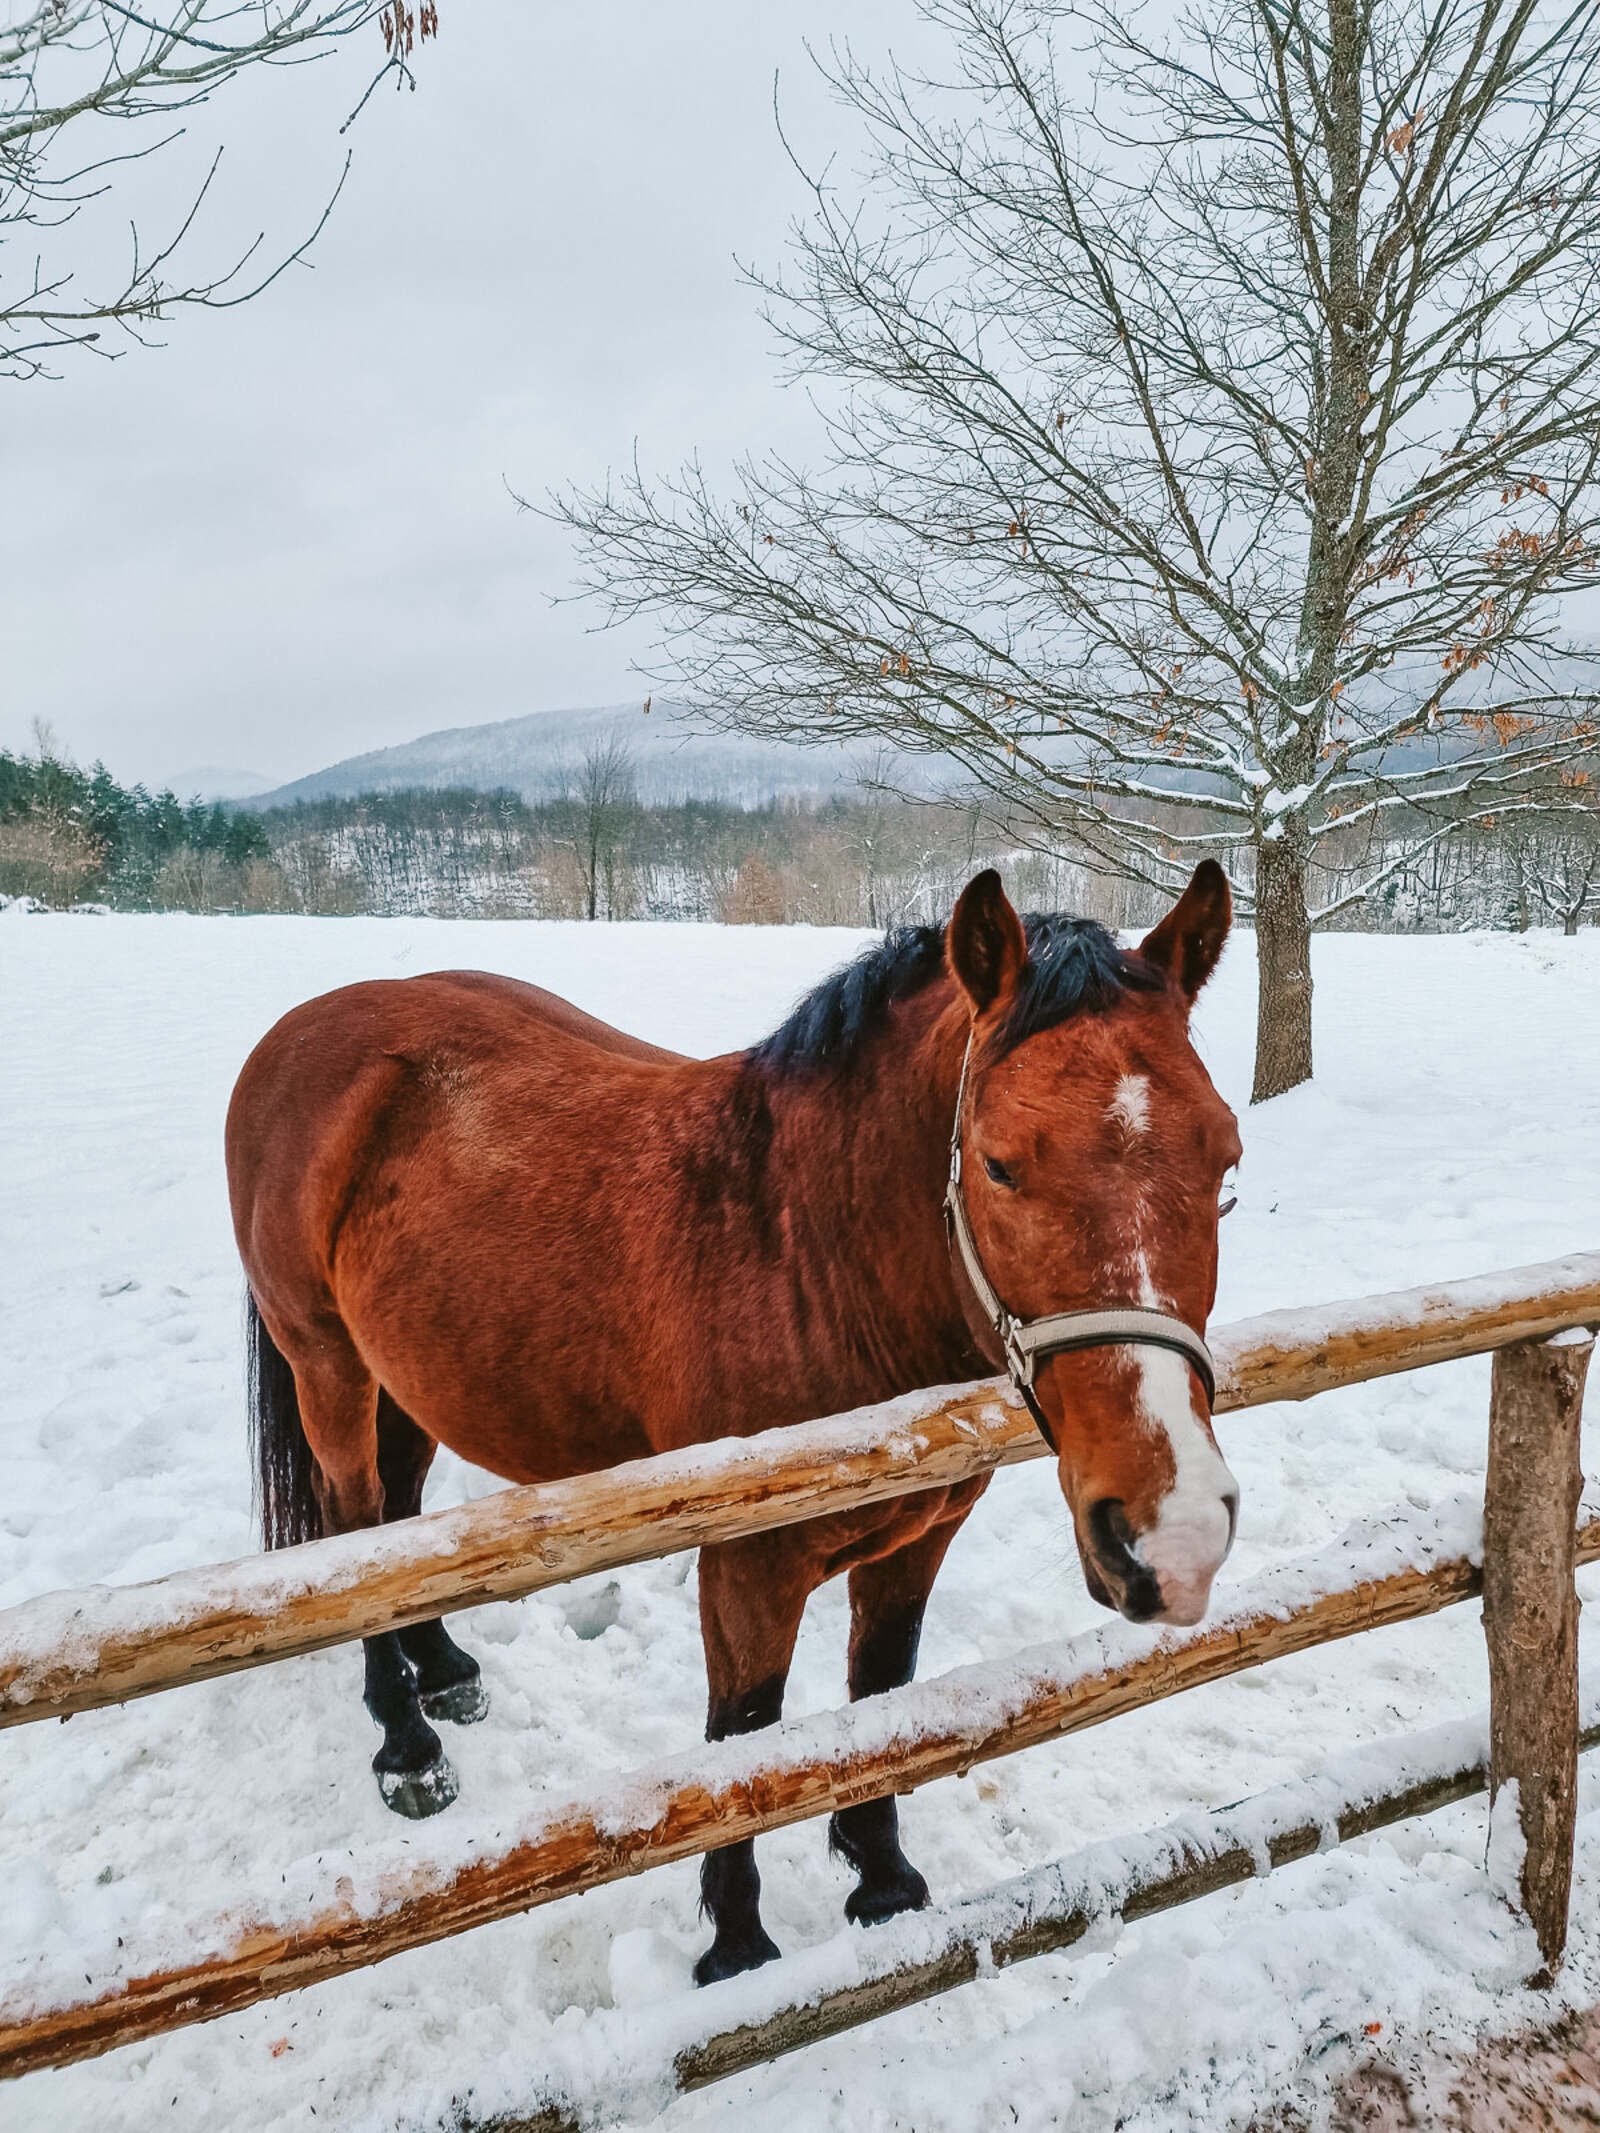 Brown horse standing in the snow looking over a wooden fence